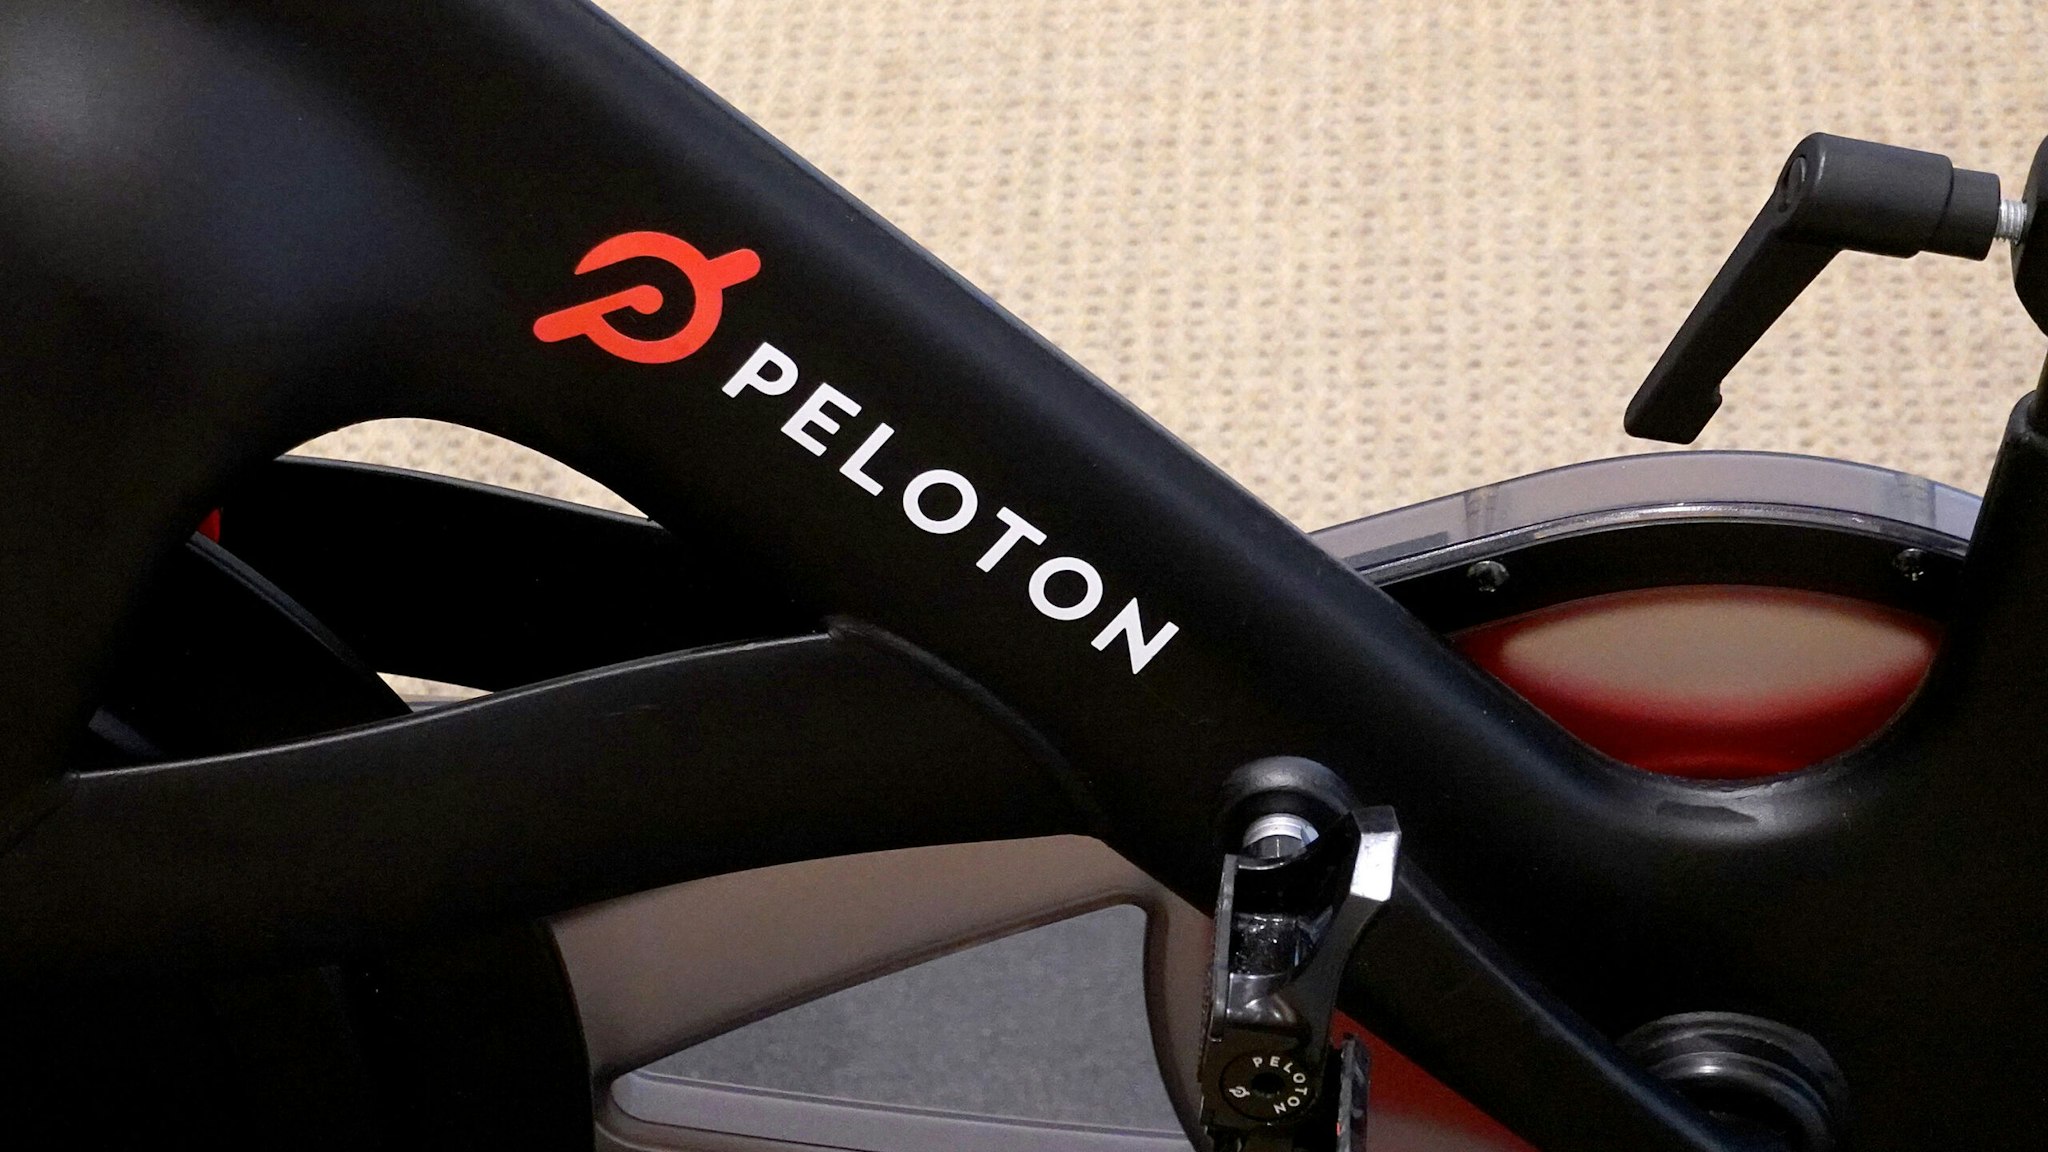 CORAL GABLES, FLORIDA - JANUARY 20: A Peloton bike on the showroom floor on January 20, 2022 in Coral Gables, Florida. Reports indicate that Peloton Interactive Inc is temporarily halting production of its bikes and treadmills after a drop in demand for the products.